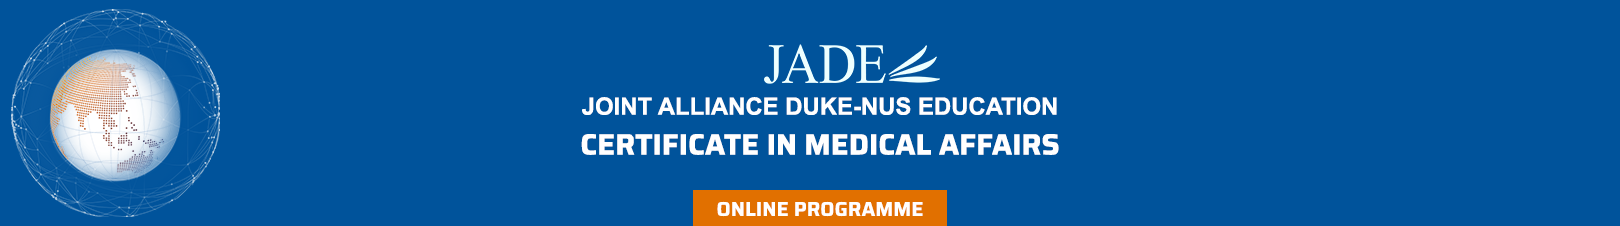 Blue banner with JADE logo on the top row, JOINT ALLIANCE DUKE-NUS EDUCATION written below the logo and Certificate in Medical Affairs written on the third line